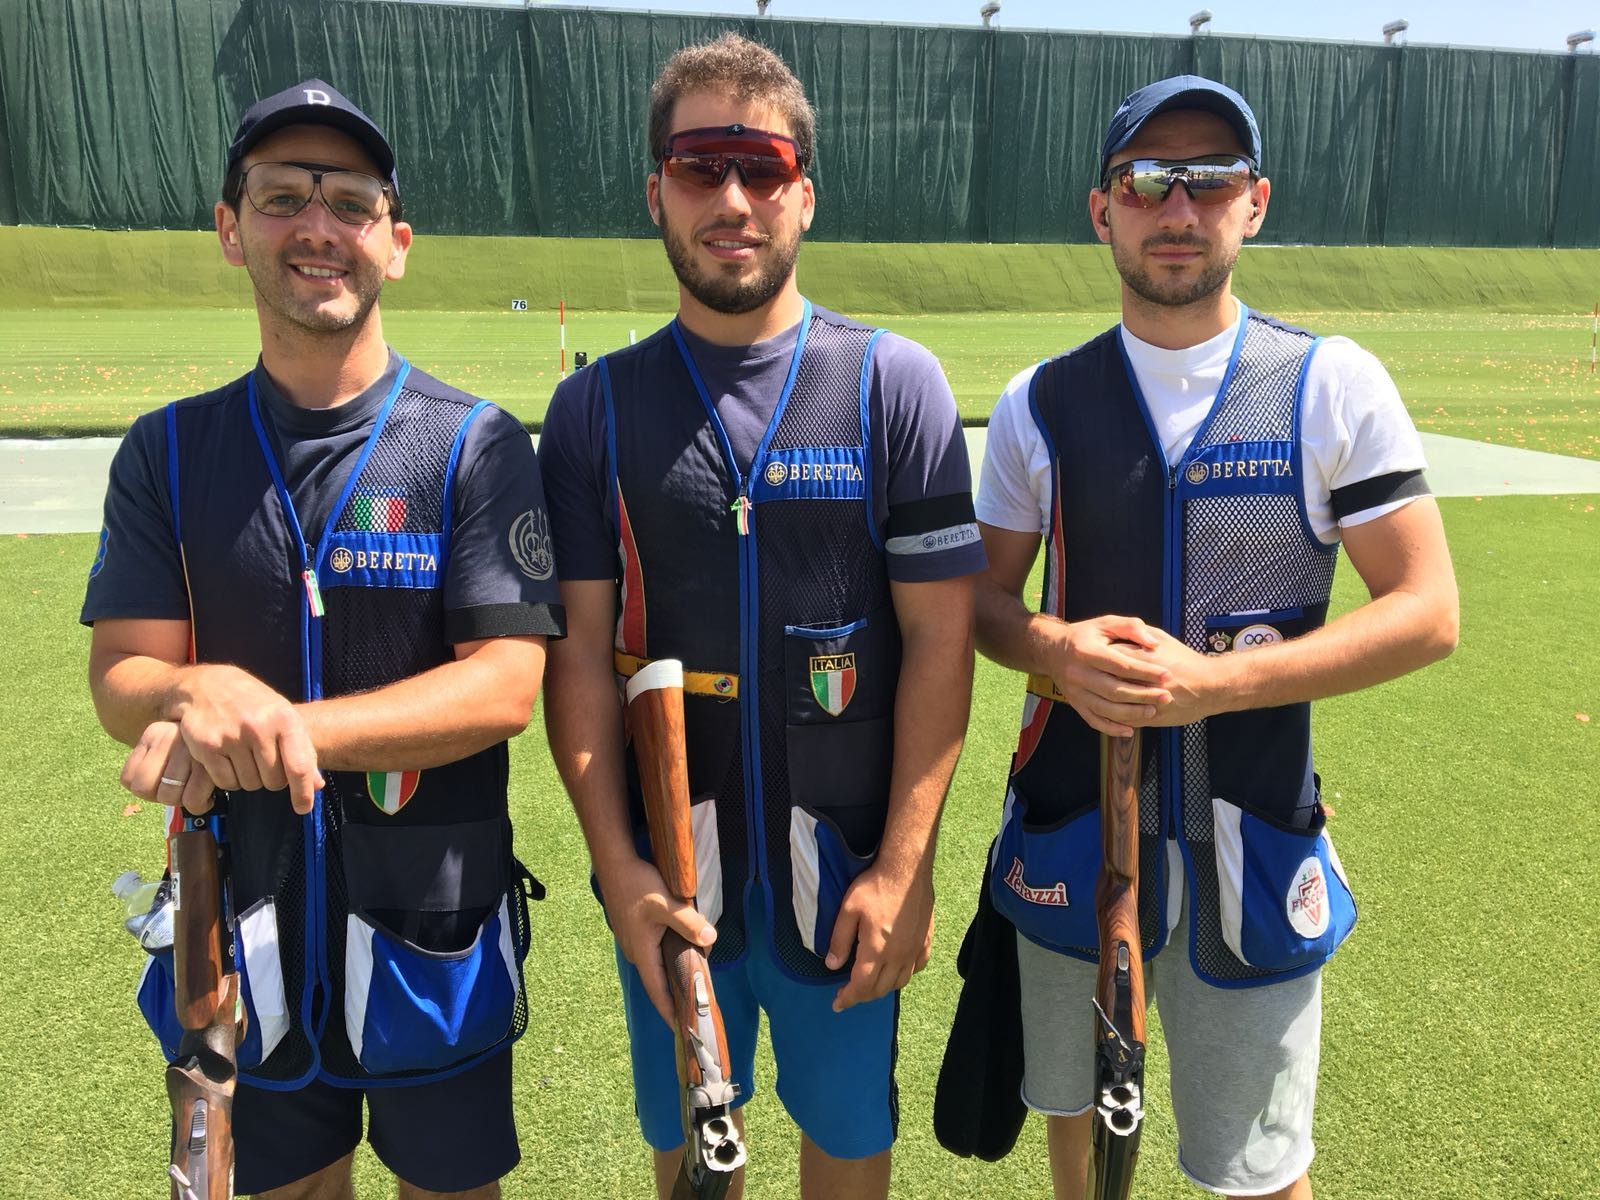 Shooters wear black armbands in support of banned ISSF vice president Rossi as World Cup opens in Malta